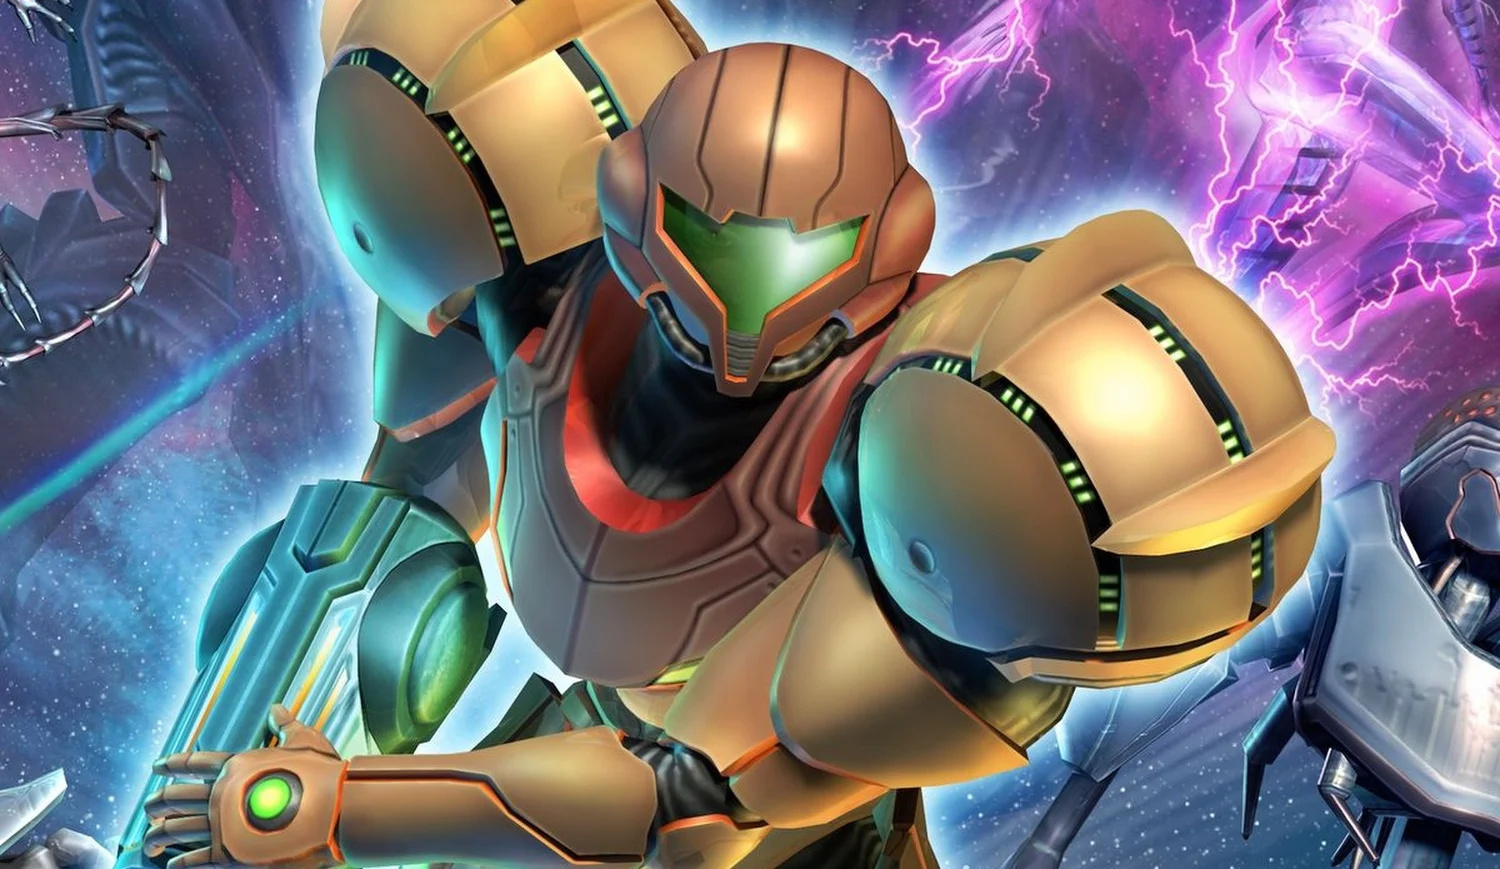 metroid trilogy on switch